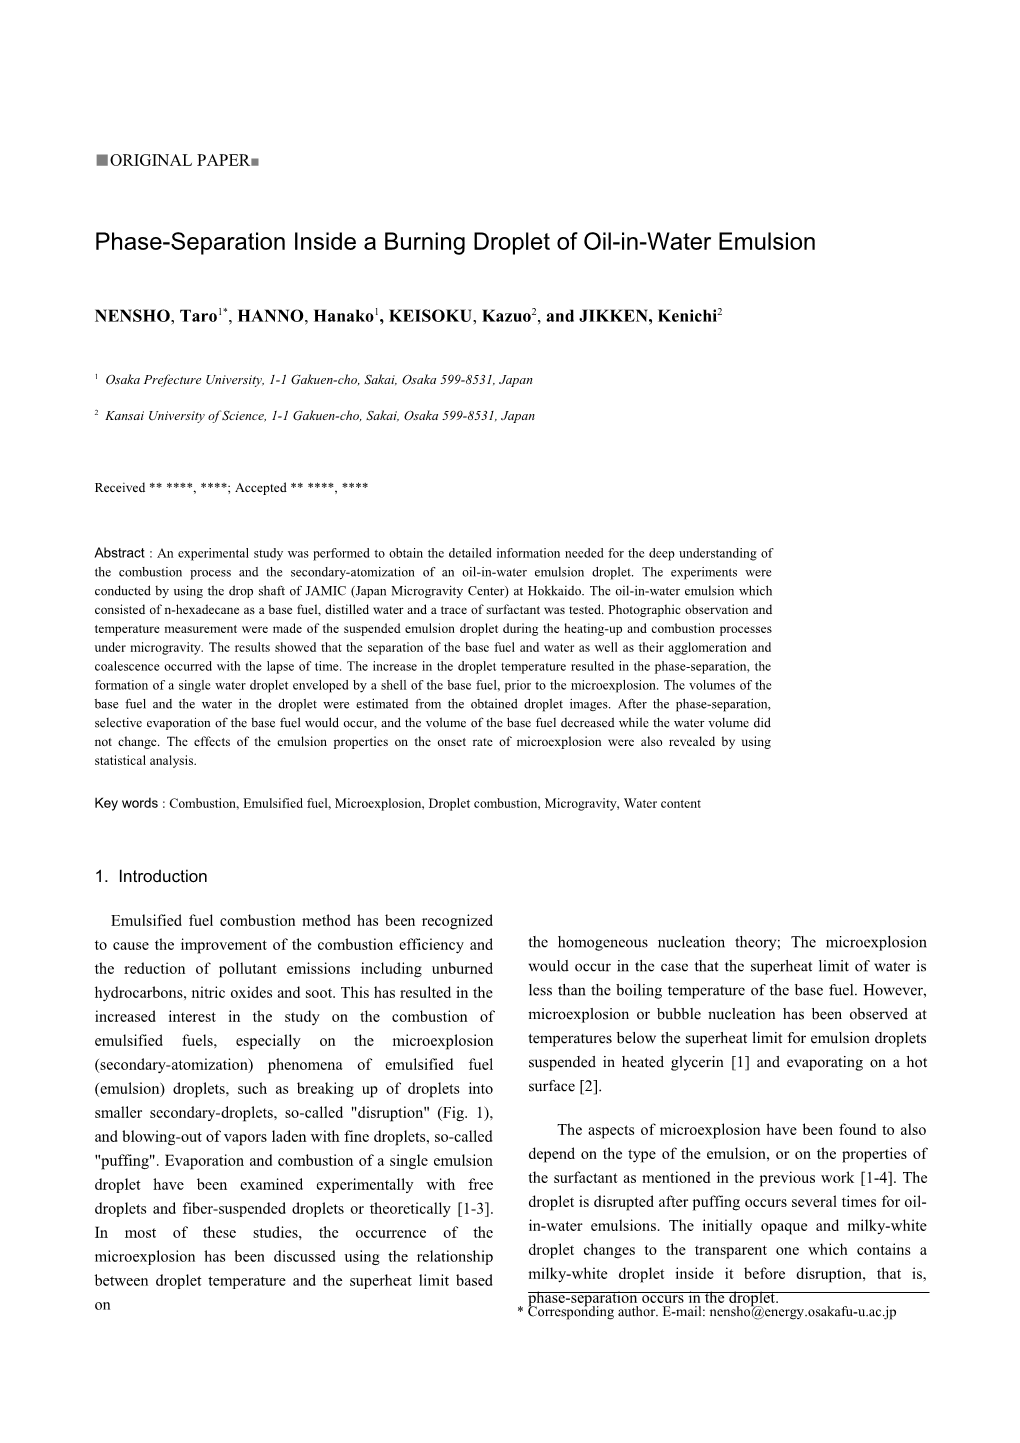 Phase-Separation Inside a Burning Droplet of Oil-In-Water Emulsion